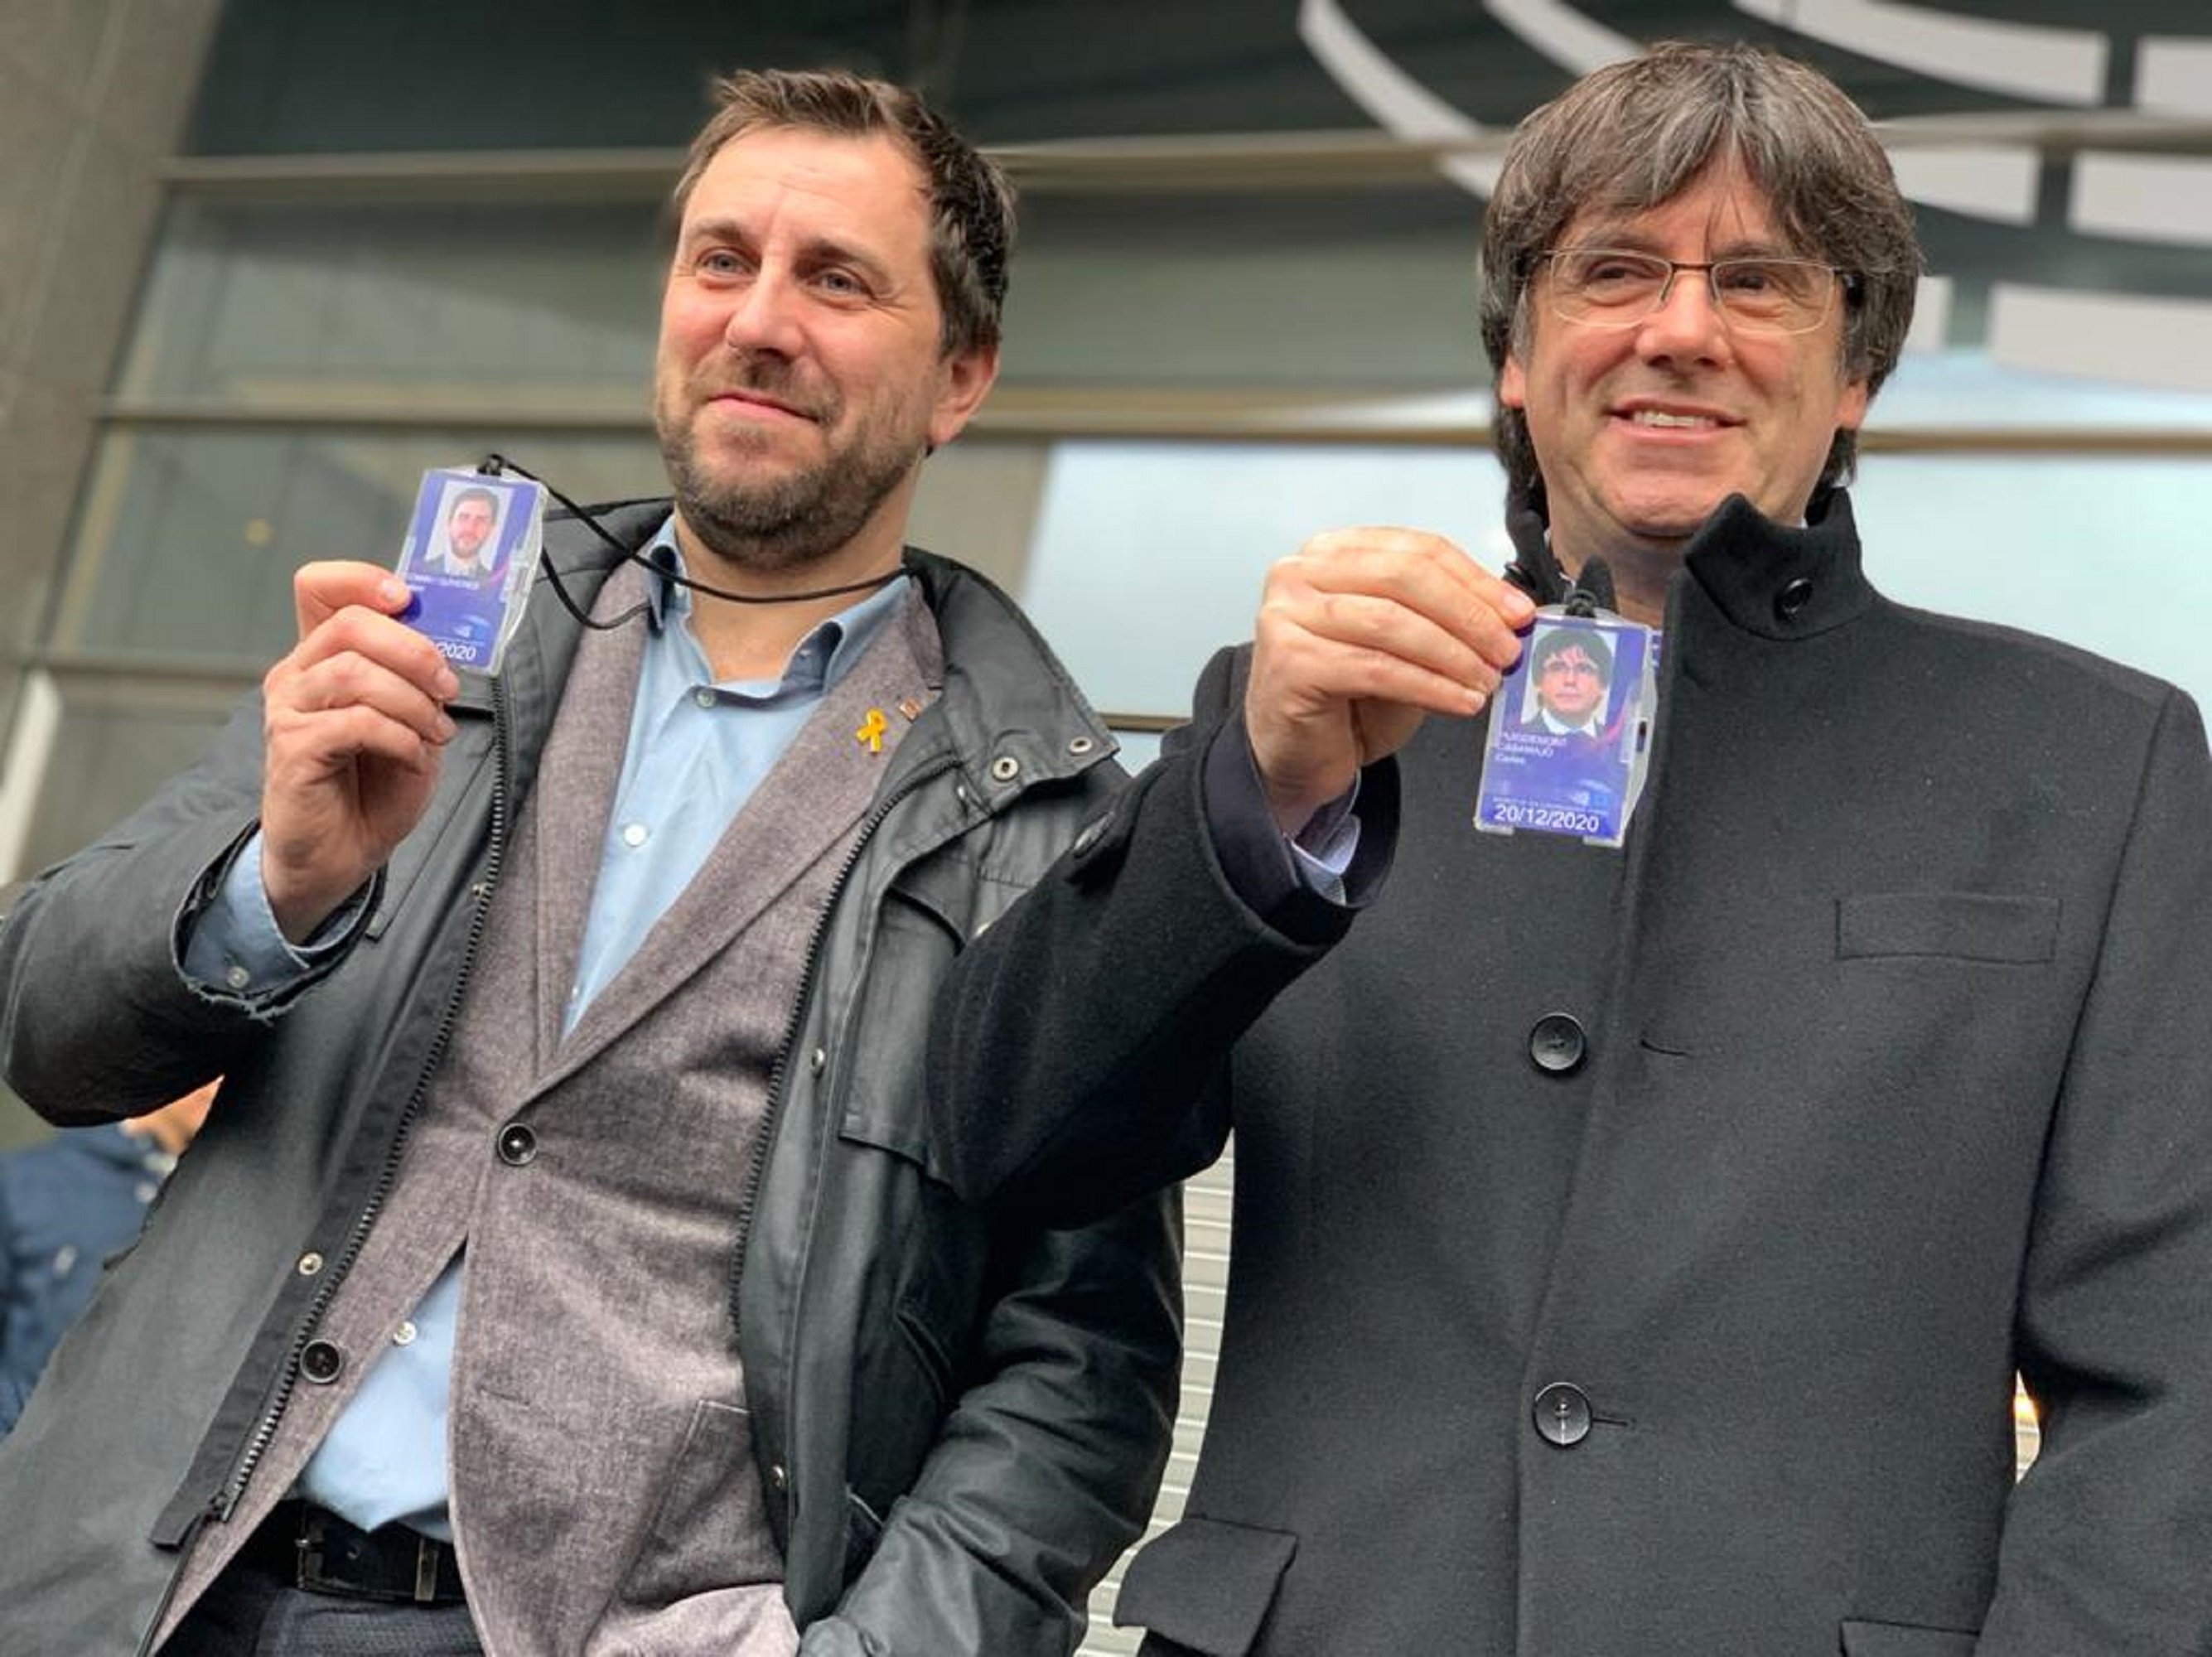 Puigdemont and Comín are now MEPs